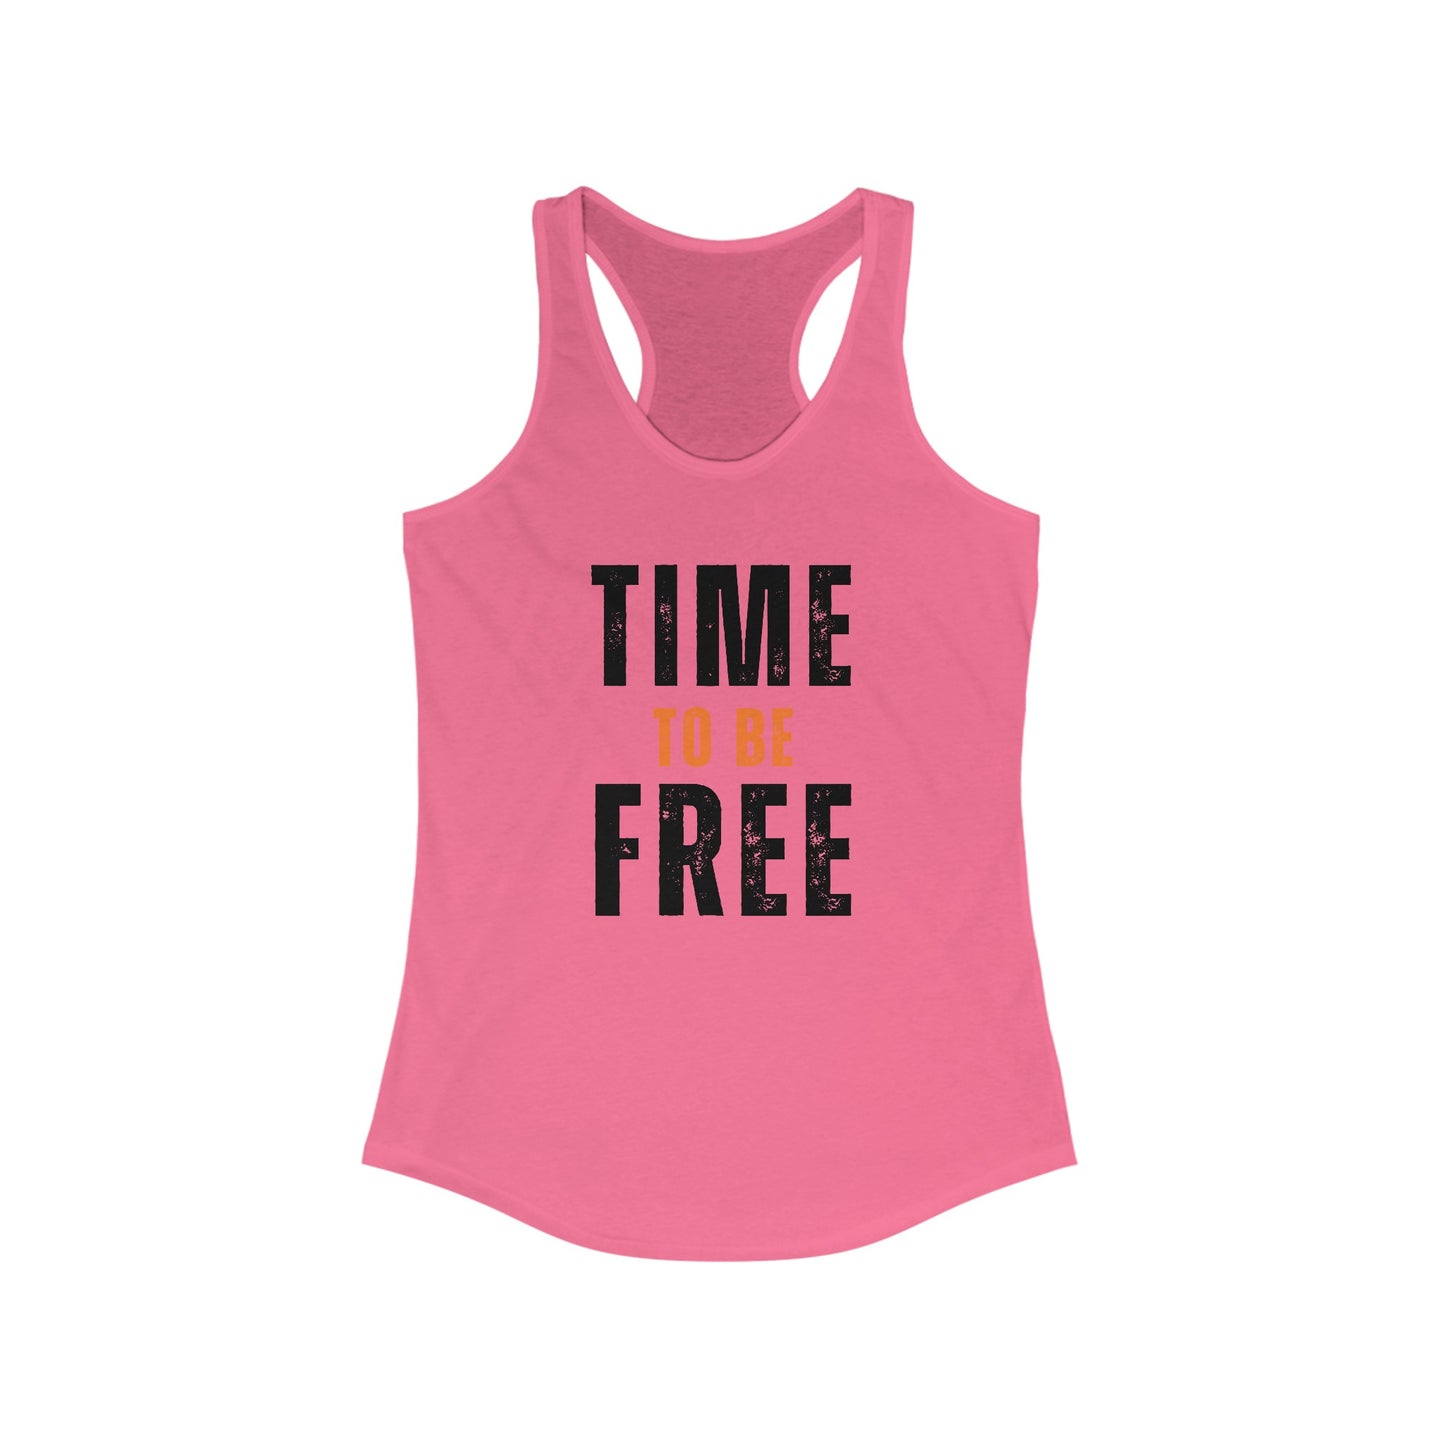 INSPIRED Time To Be Free B WOMEN'S Racerback Tank